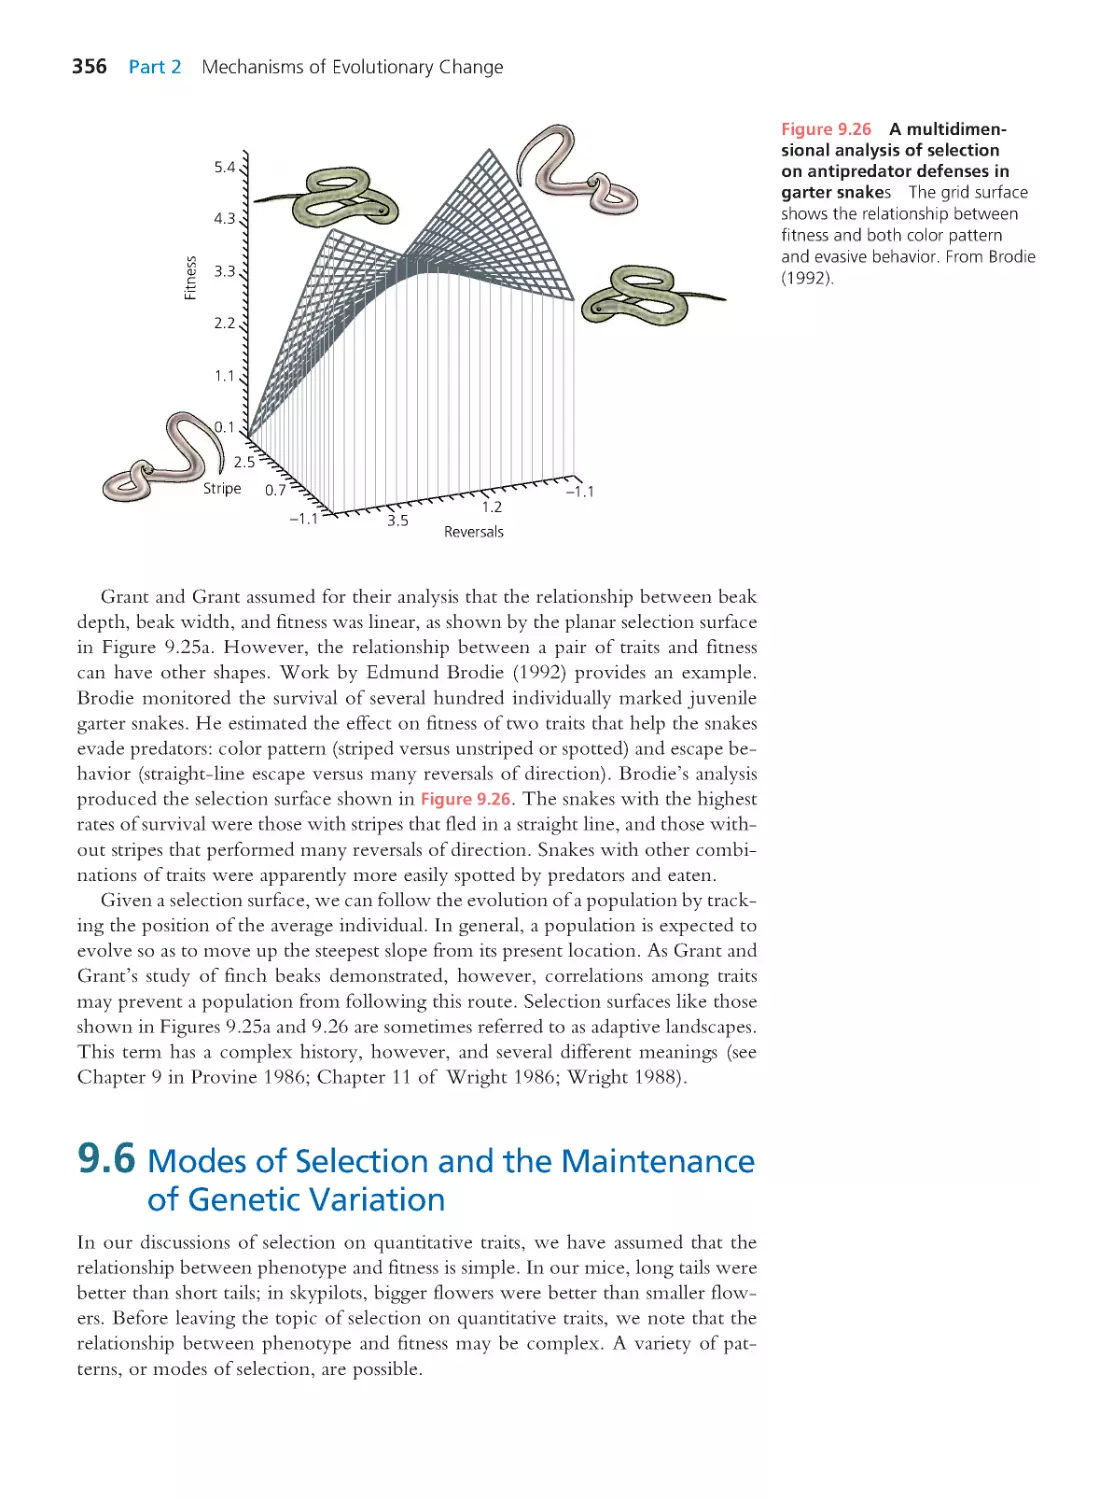 9.6 Modes of Selection and the Maintenance of Genetic Variation